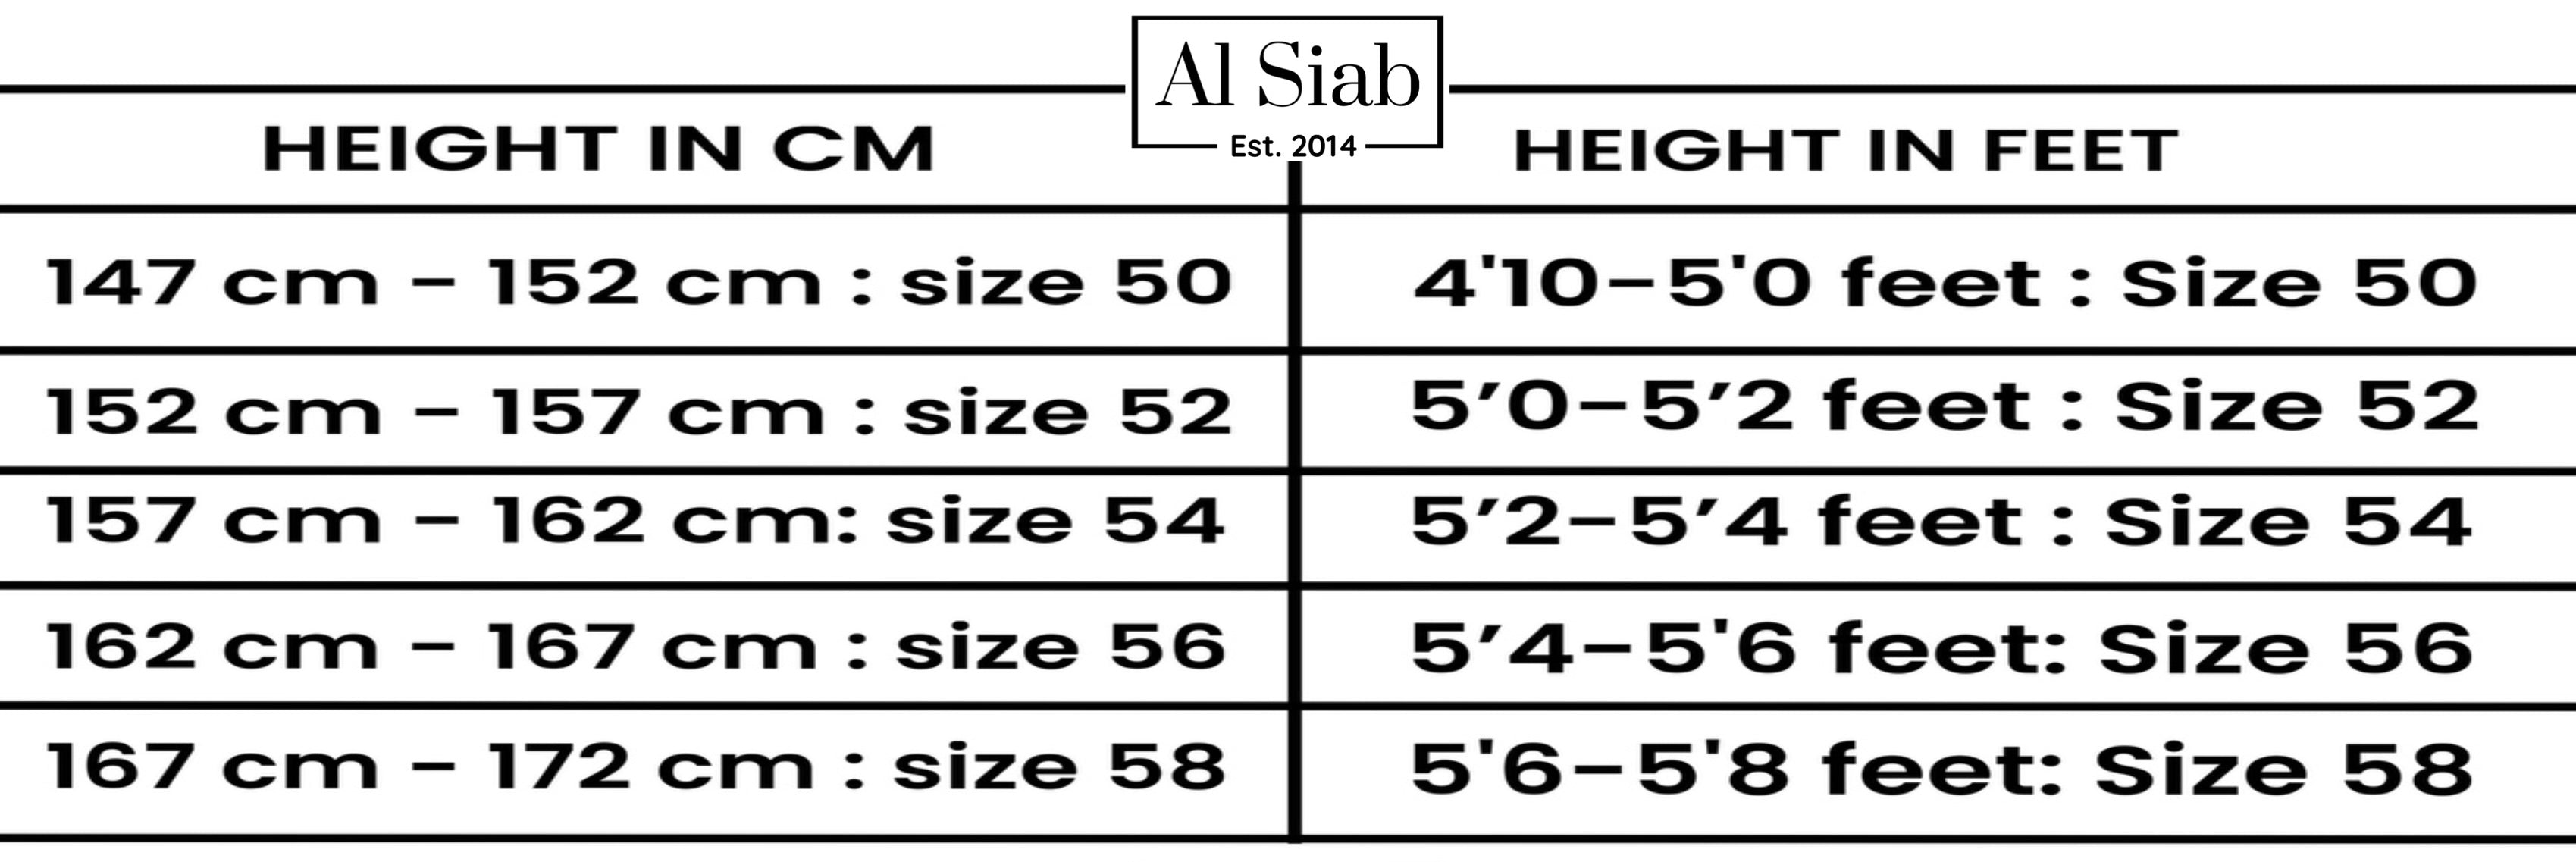 Zoom Material Abaya With Elasticated Sleeves.